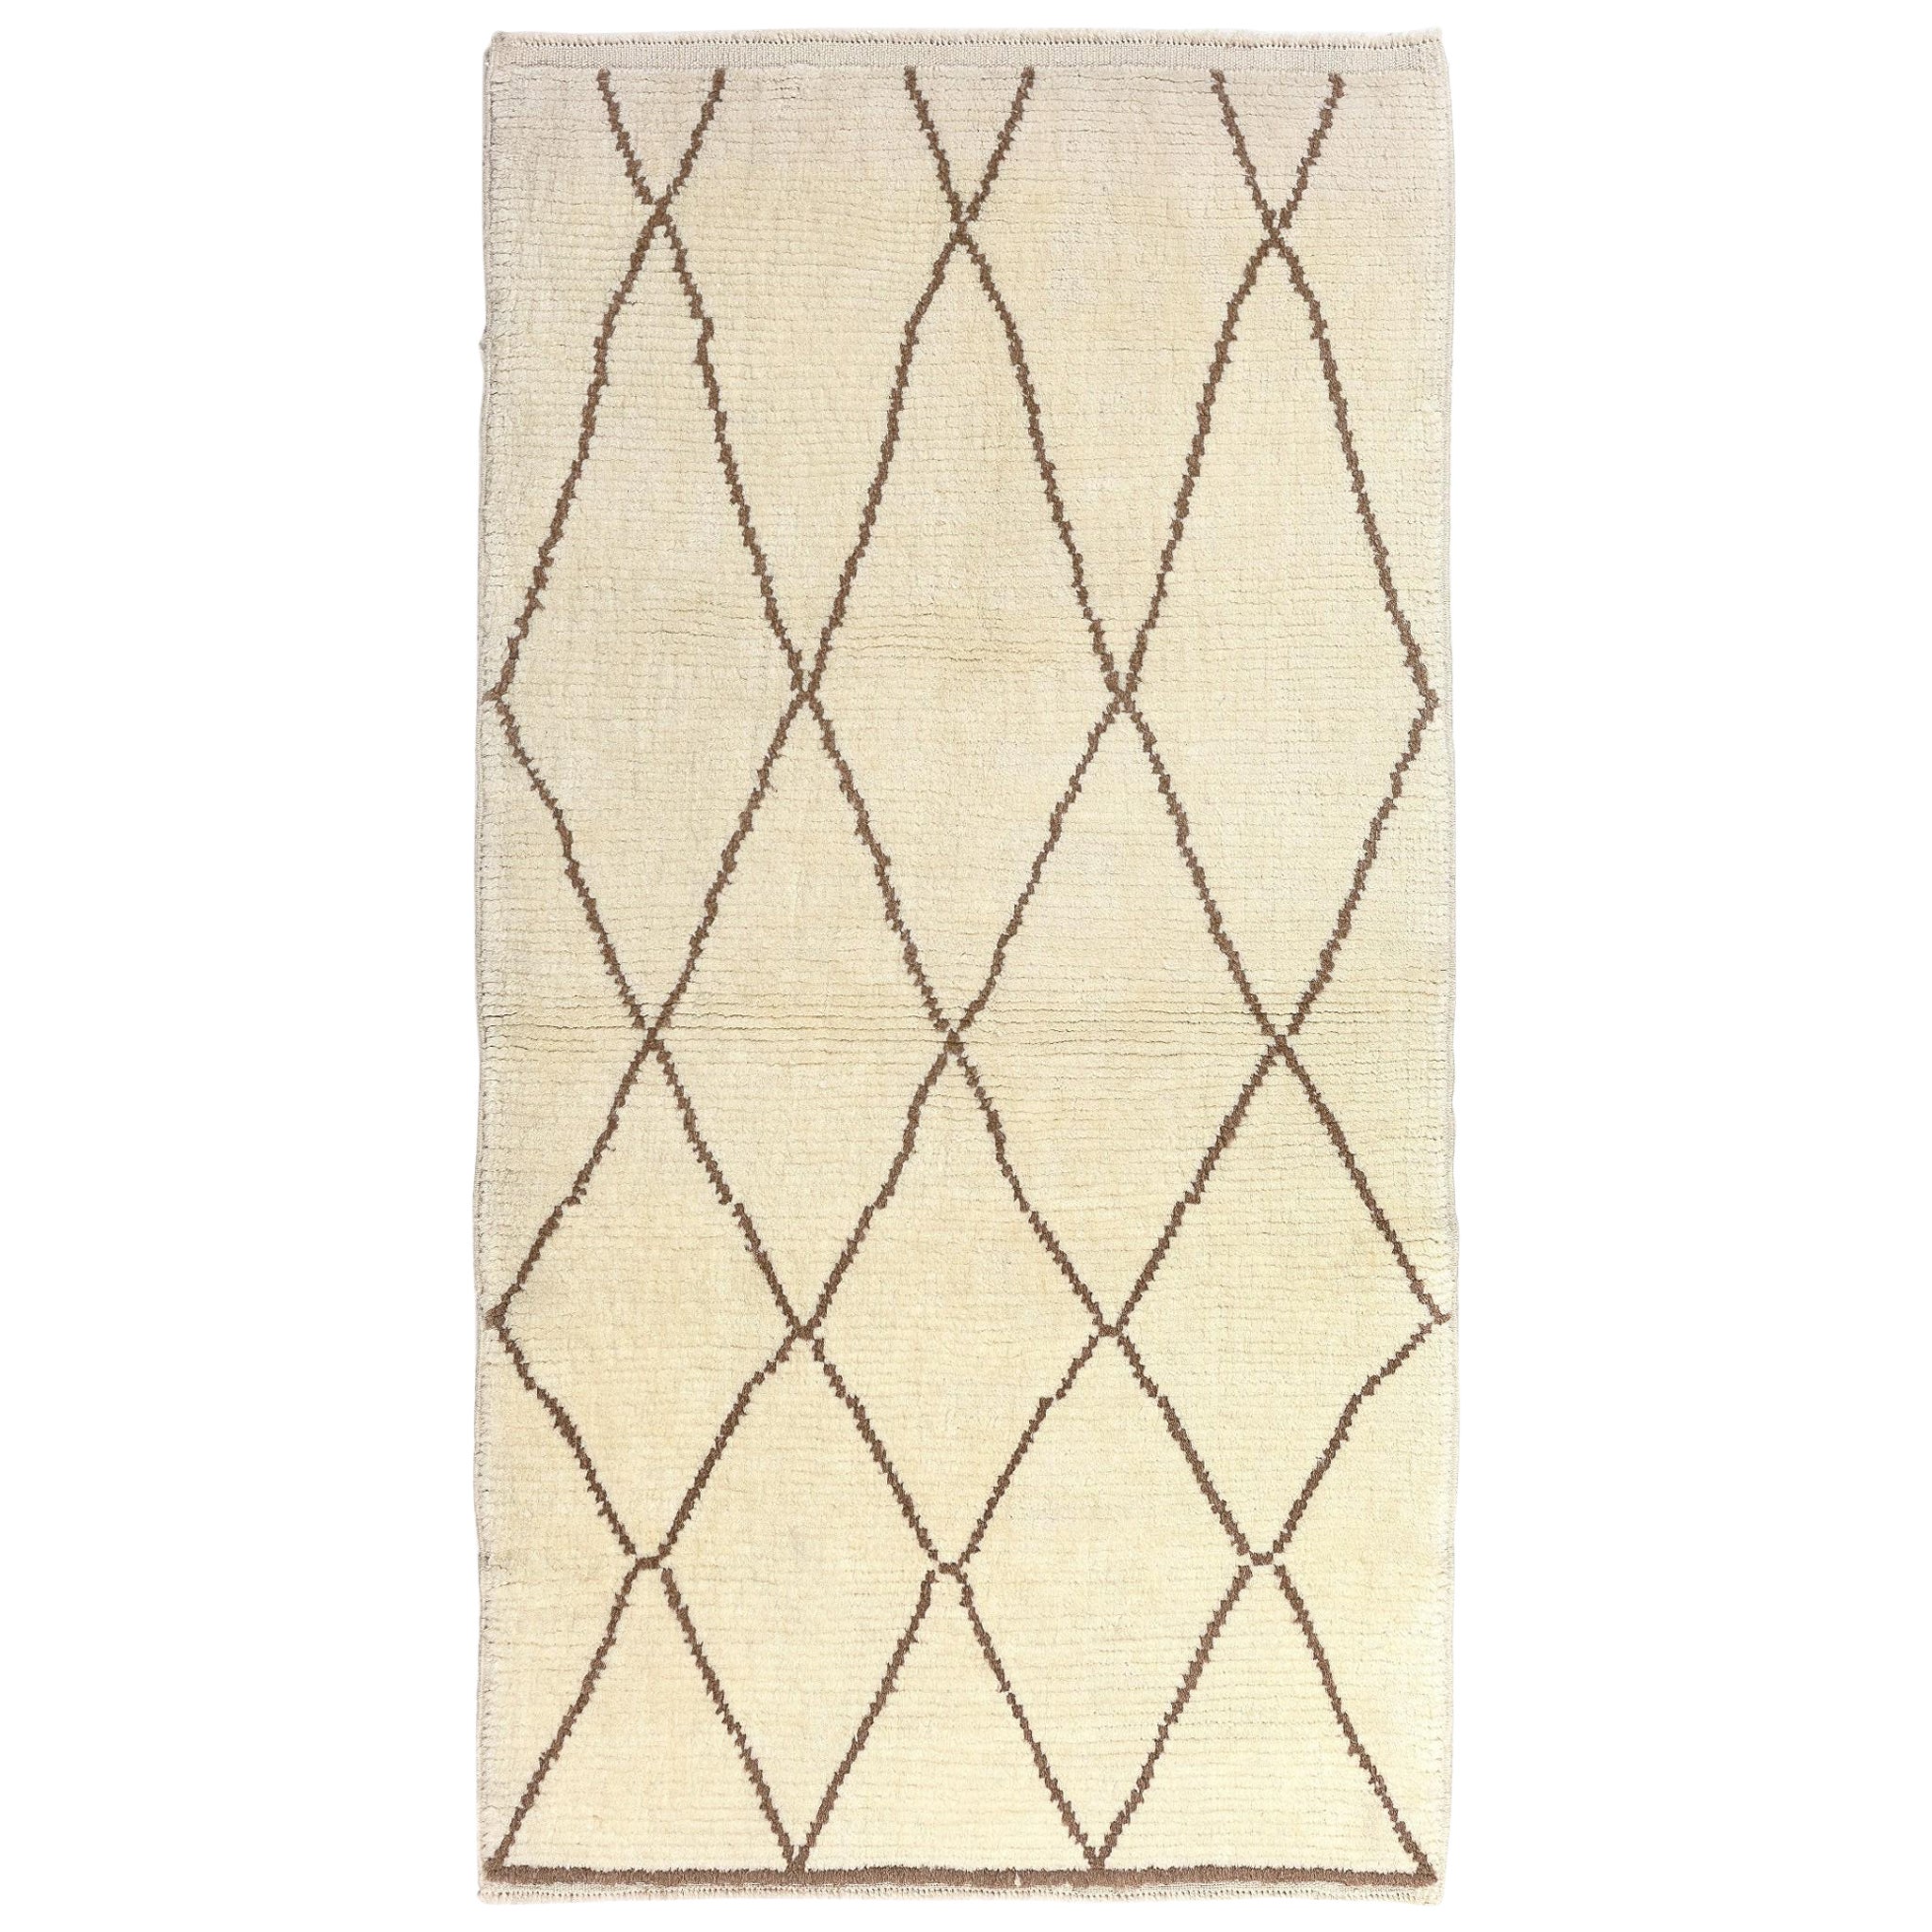 3.4x6 Ft Modern Moroccan Rug, 100% Natural Undyed Wool, Custom Options Available